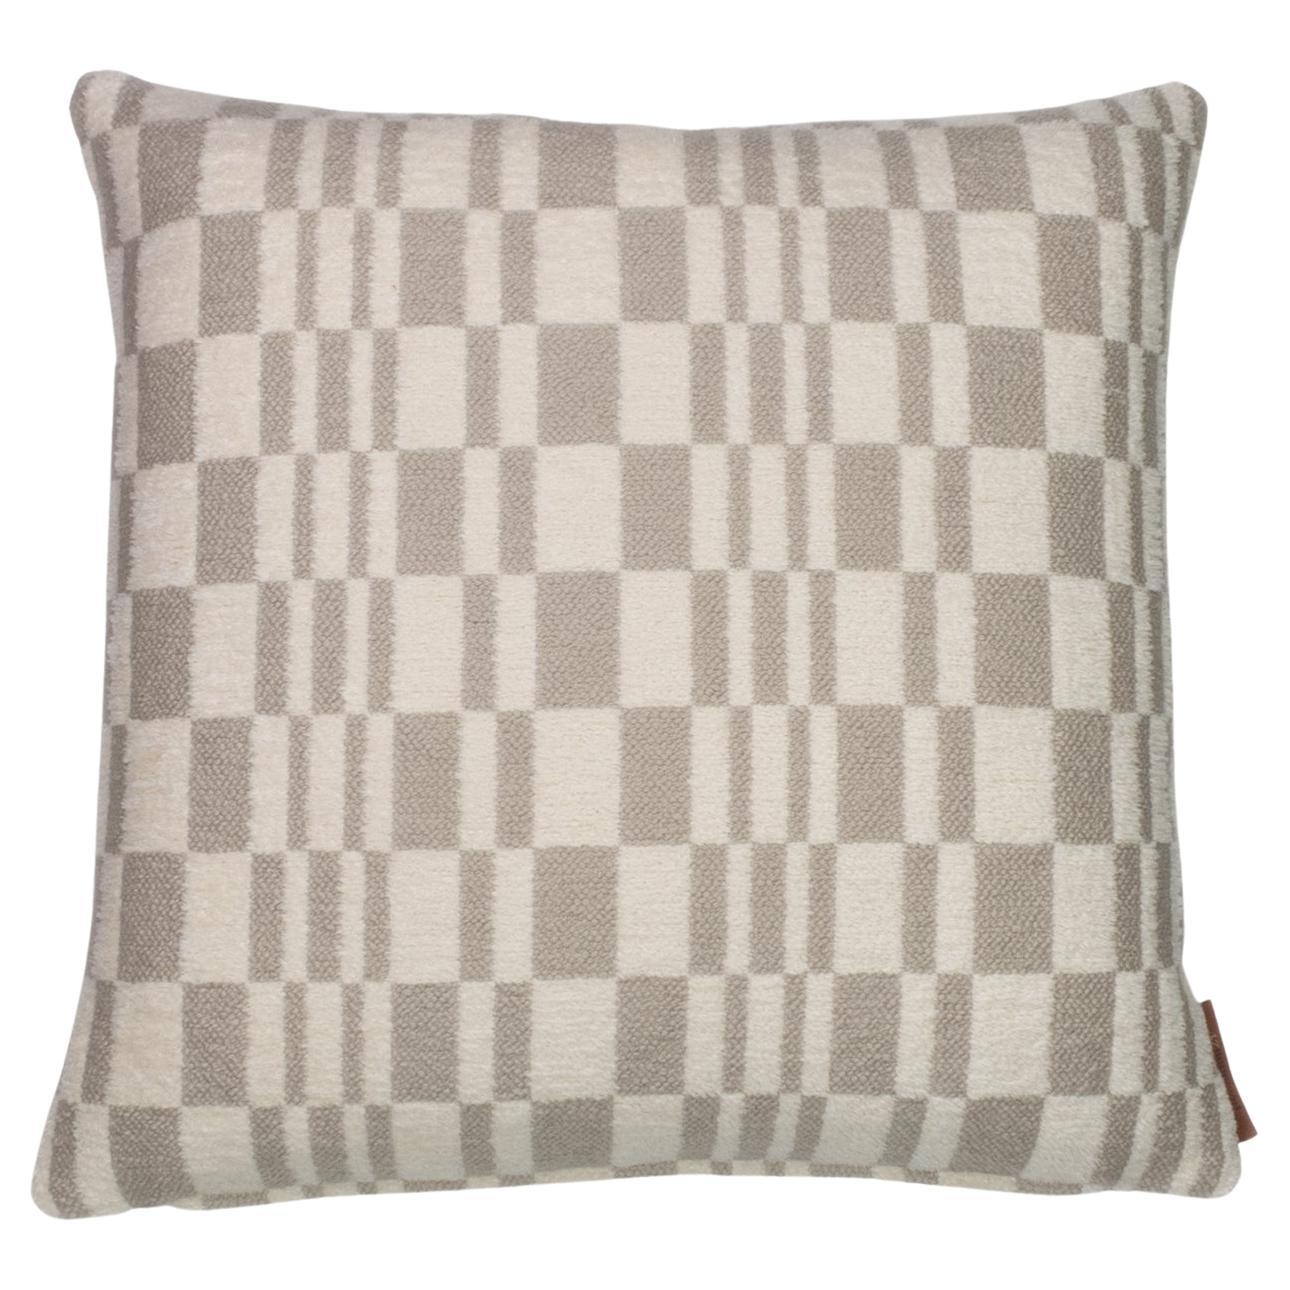 Cushion / Pillow Chess Linen by Evolution21 For Sale